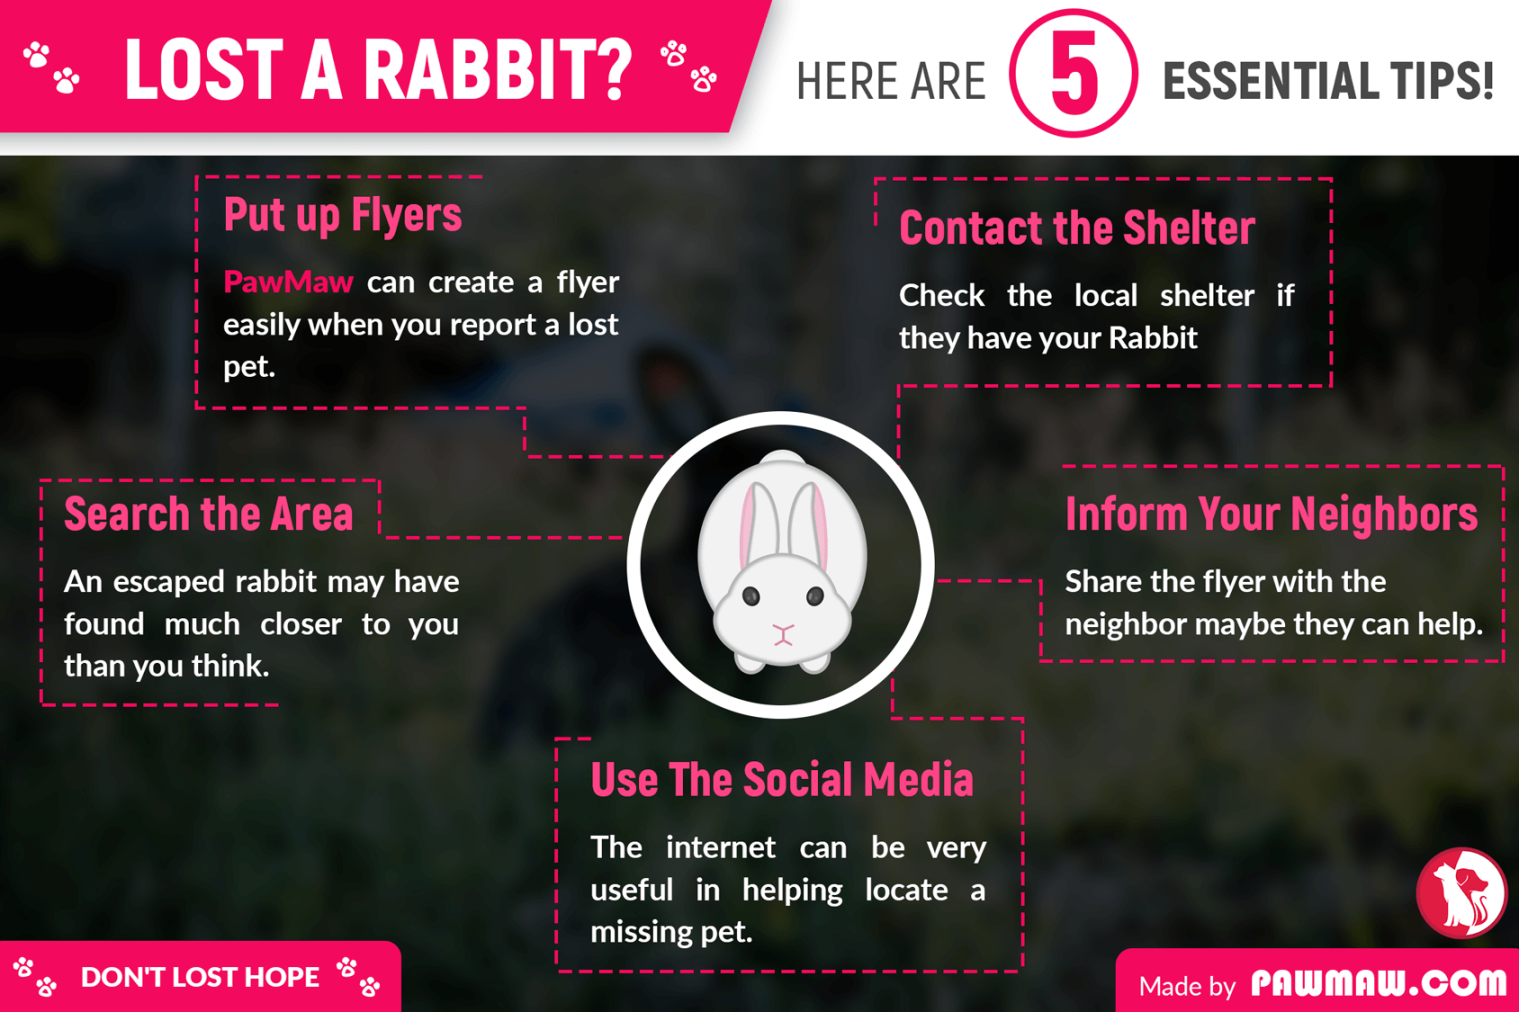 Here is What You Should Do If You Have Found/Lost a Rabbit